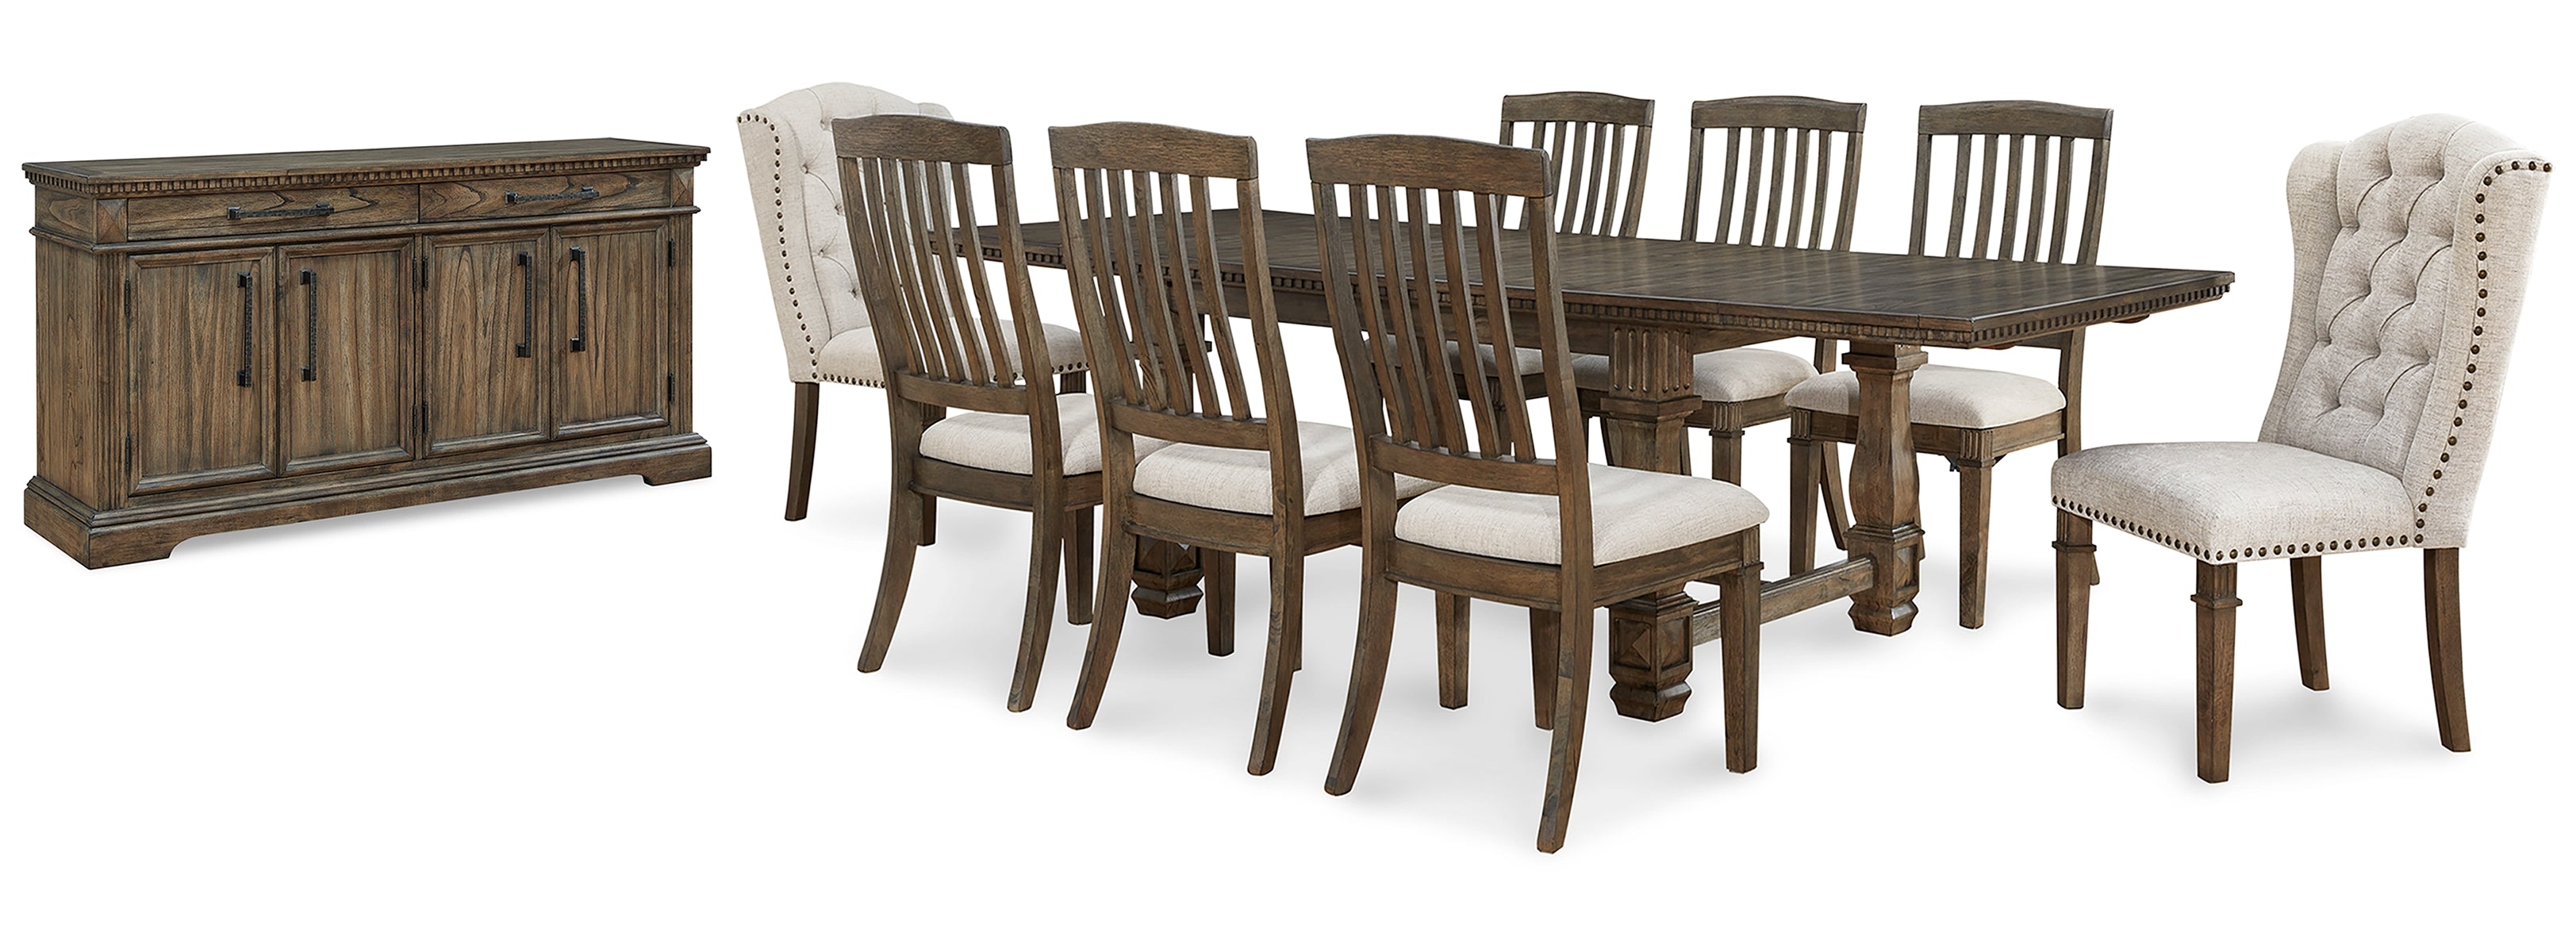 Markenburg Dining Table and 8 Chairs with Storage